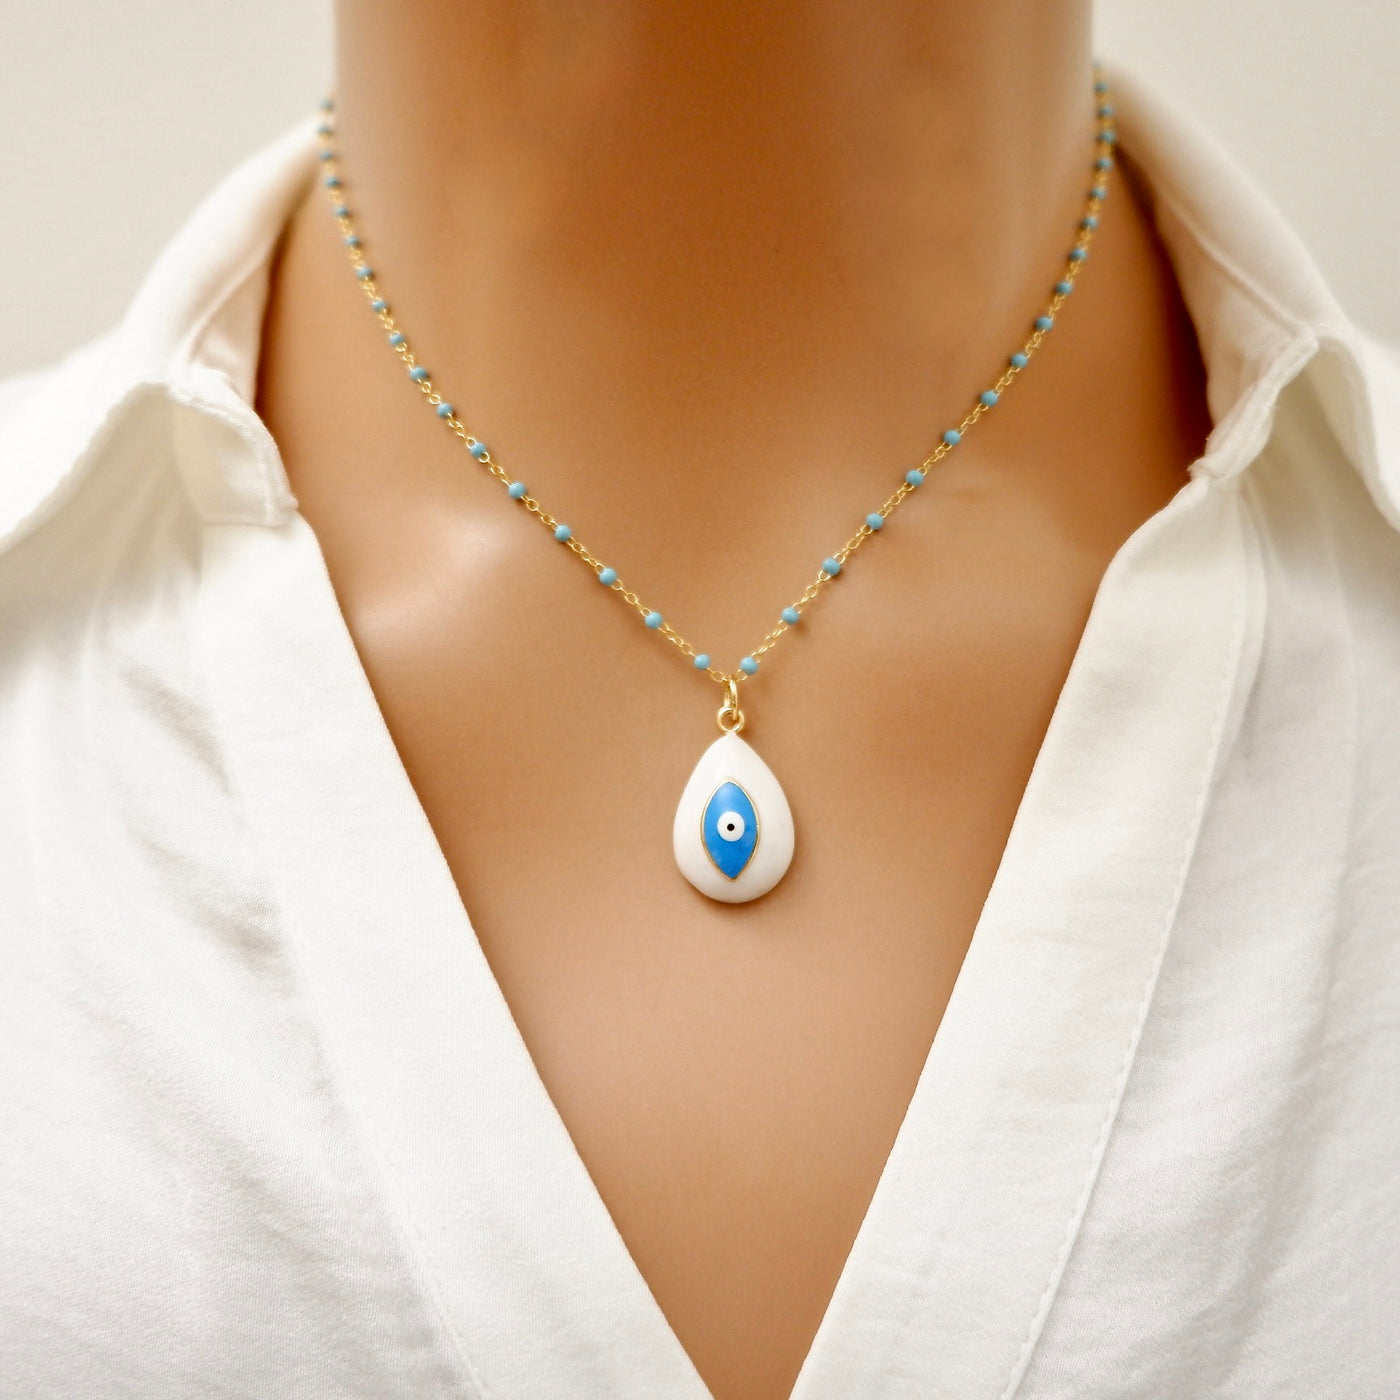 my sweet turquoise evil eye necklace